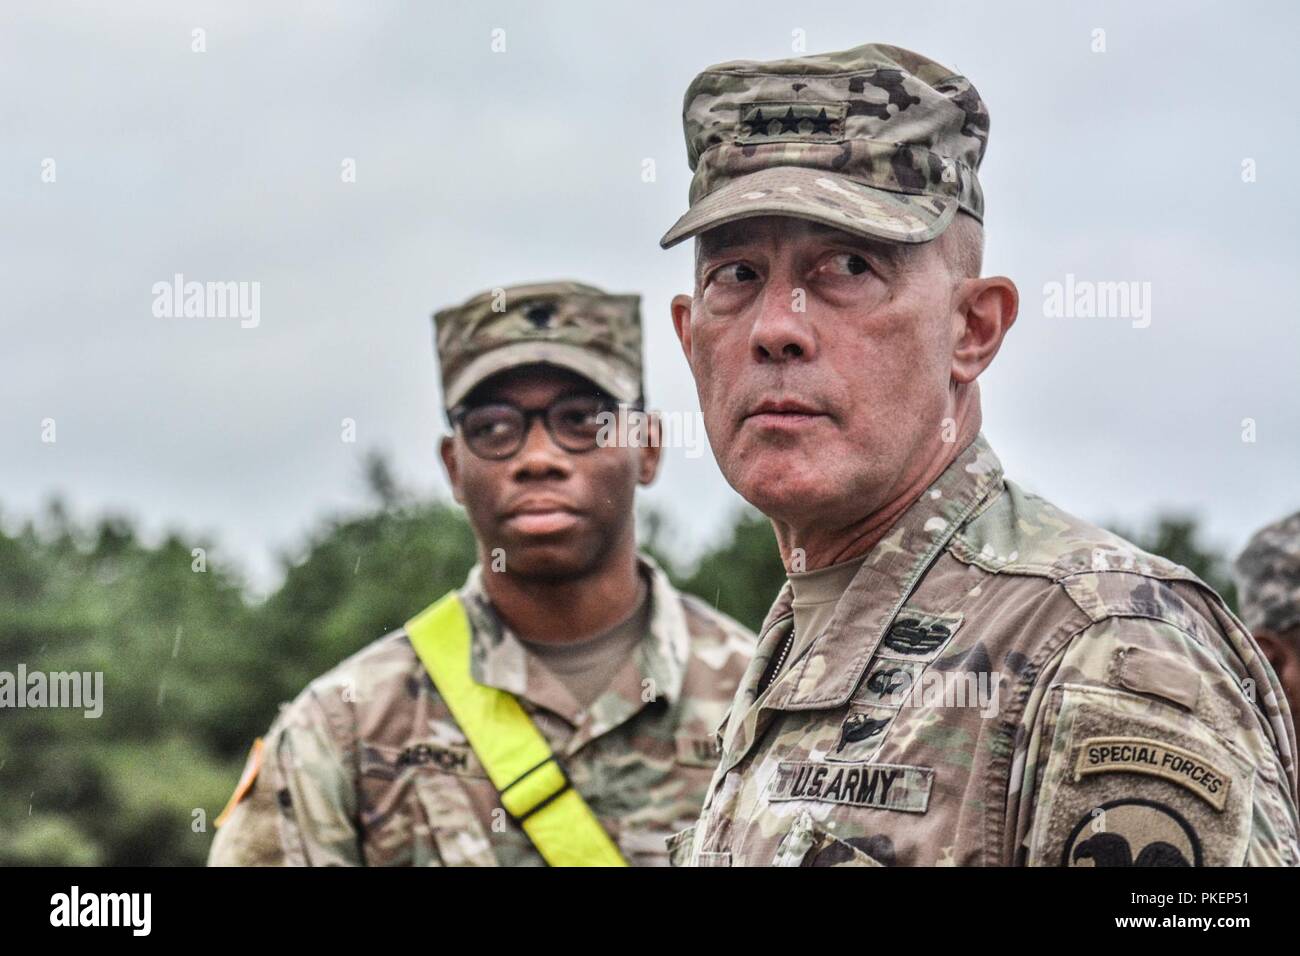 LTG Charles D. Luckey, Chief of Army Reserve and Commanding General, U.S. Army Reserve Command, views range operations during Task Force Ultimate, Operation Cold Steel II, hosted by U.S. Army Civil Affairs and Psychological Operations Command (Airborne), July 25, 2018 at Joint Base McGuire-Dix-Lakehurst, N.J. Operation Cold Steel is the U.S. Army Reserve's crew-served weapons qualification and validation exercise to ensure America's Army Reserve units and Soldiers are trained and ready to deploy on short notice as part of Ready Force X and bring combat-ready and lethal firepower in support of  Stock Photo